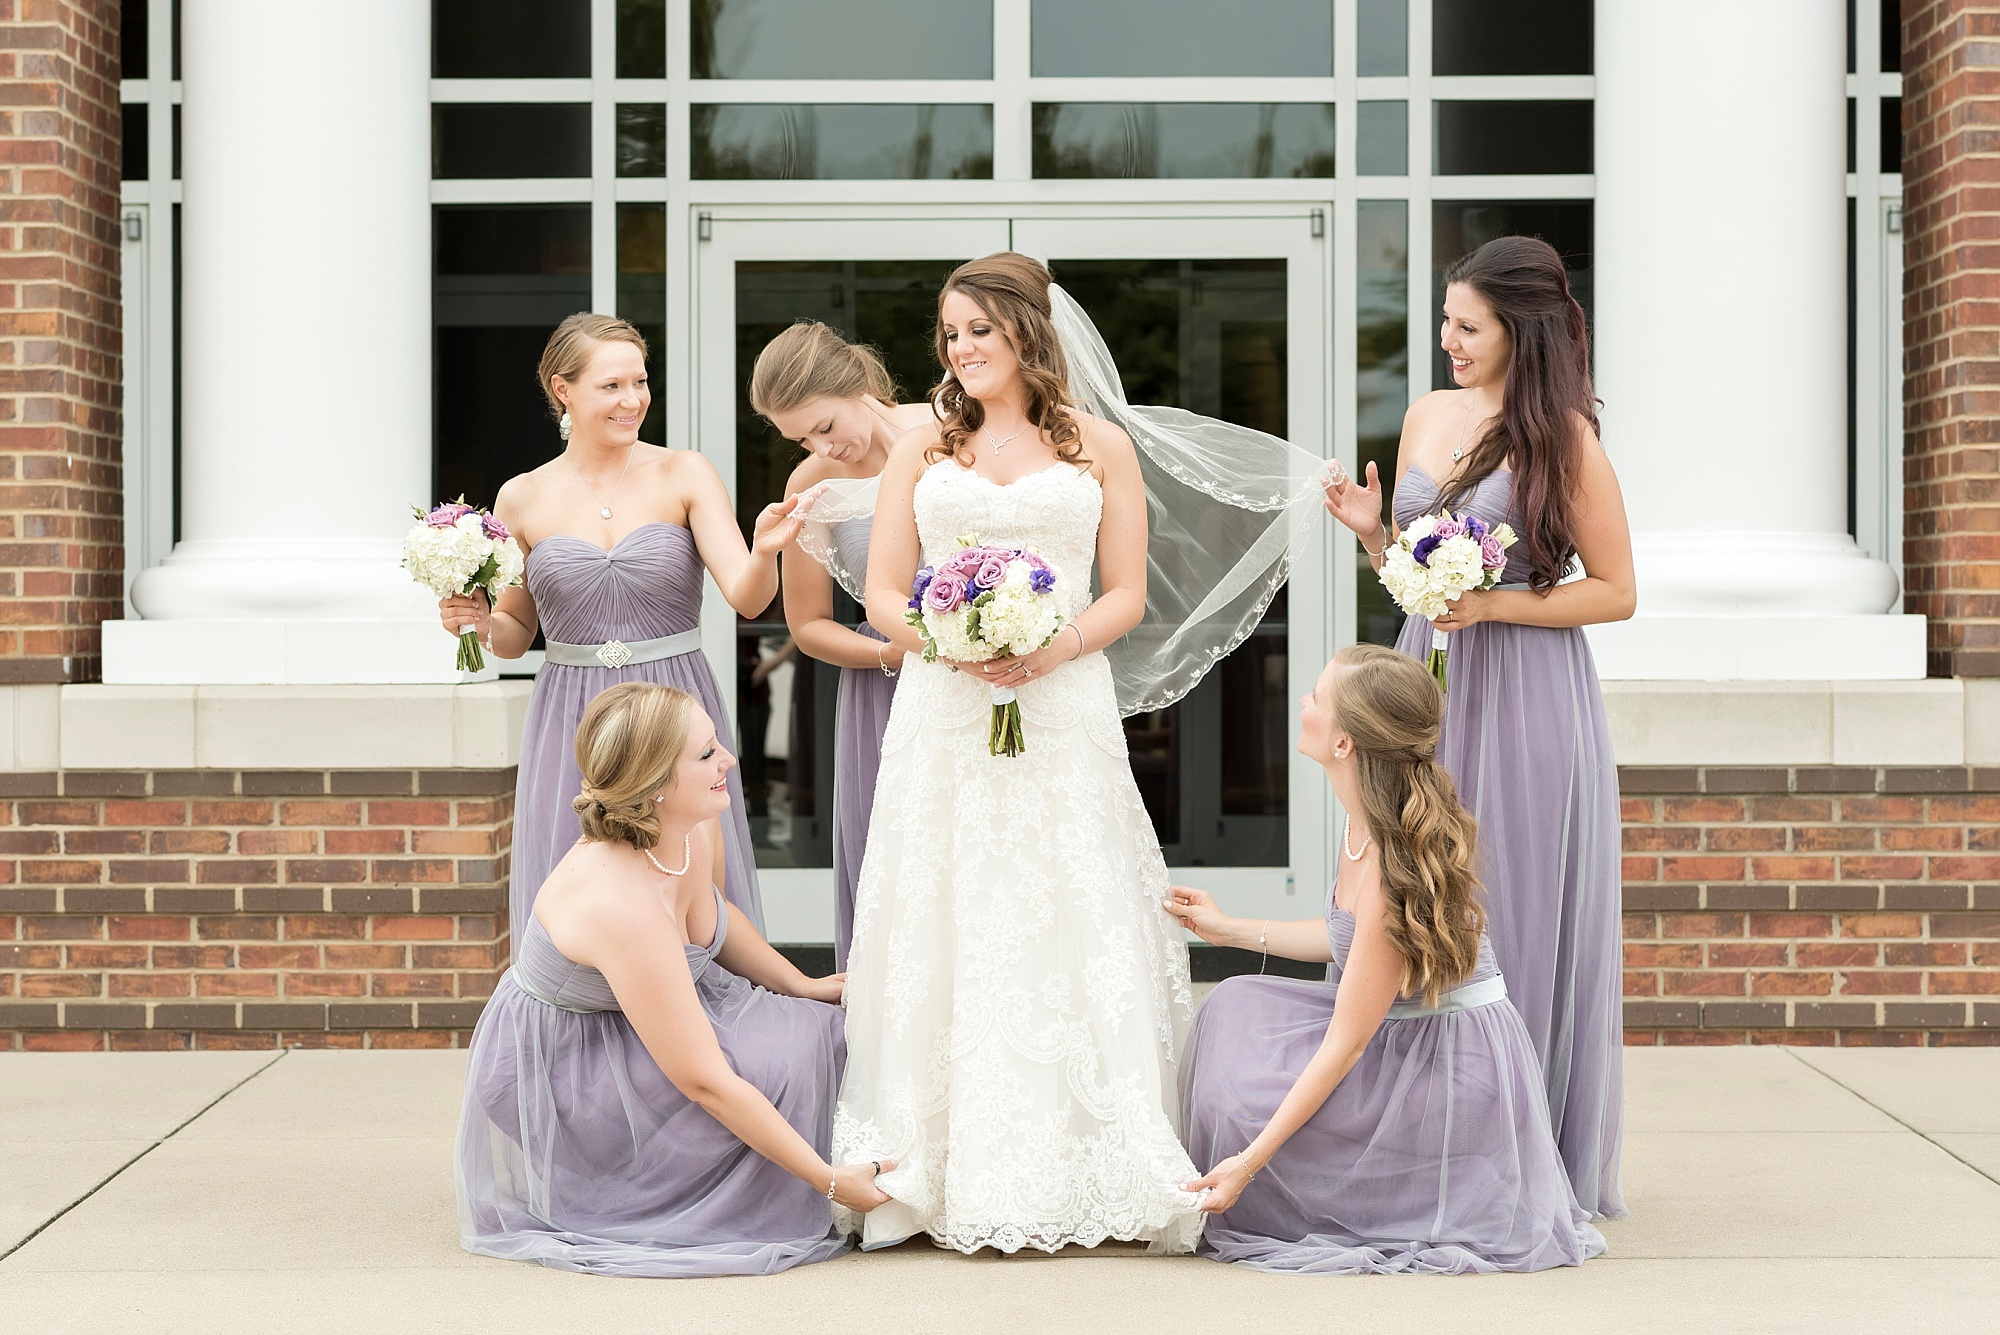 Belle Aire Baptist Wedding with a Embassy Suites Murfreesboro Reception